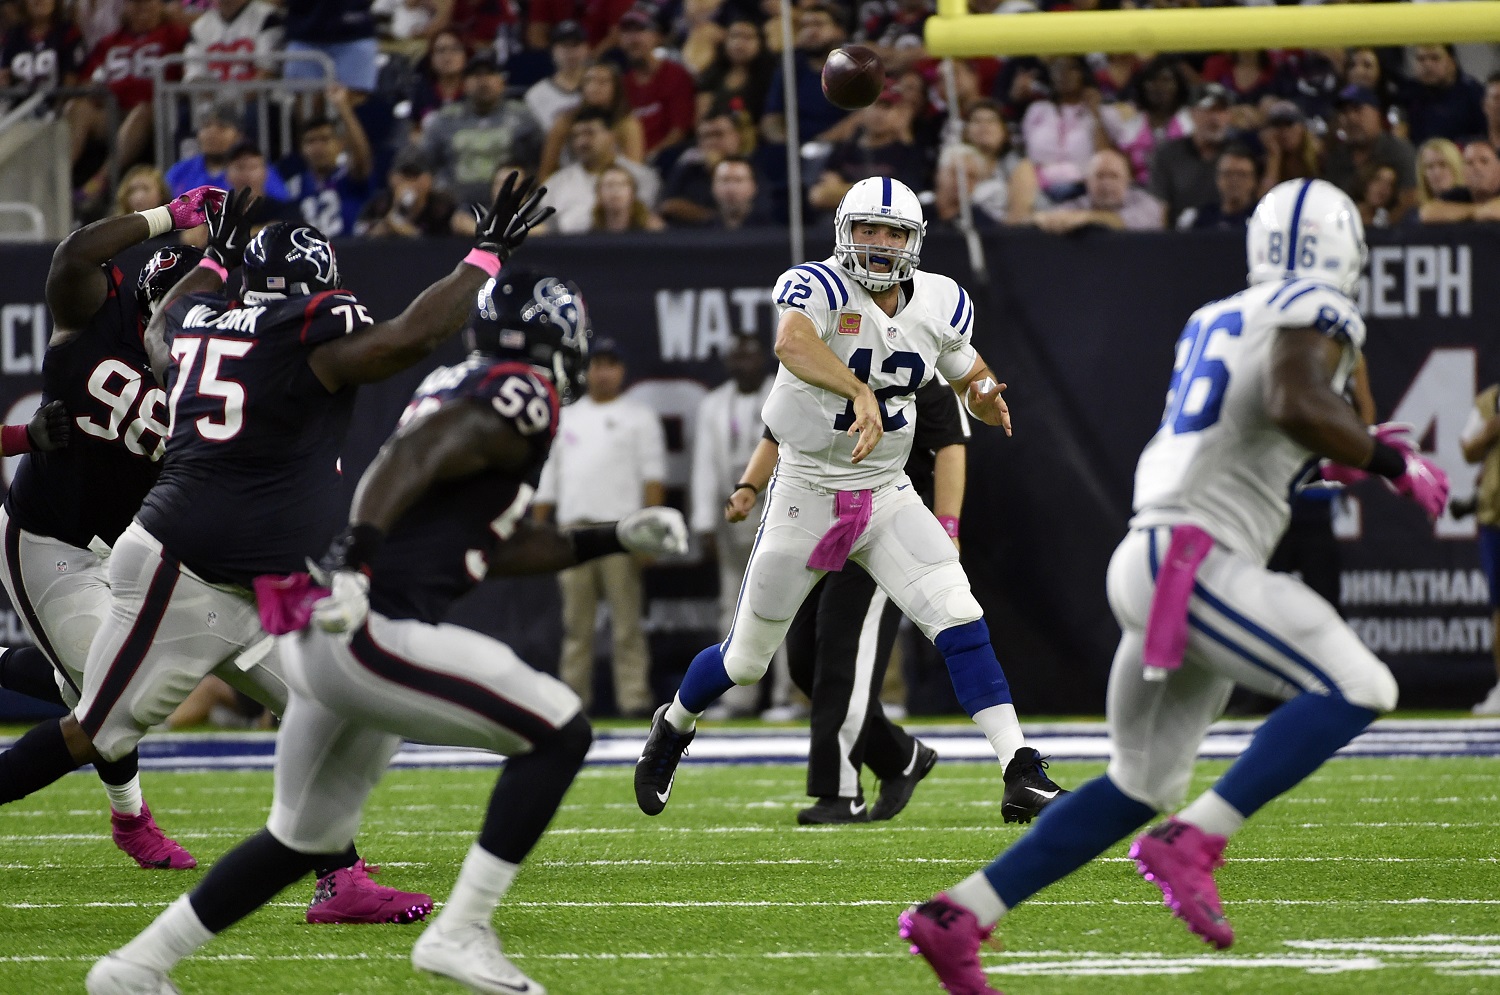 Indianapolis Colts quarterback Andrew Luck (12) throws against the Houston Texans during the second half of an NFL football game Sunday, Oct. 16, 2016, in Houston. (AP Photo/Eric Christian Smith)